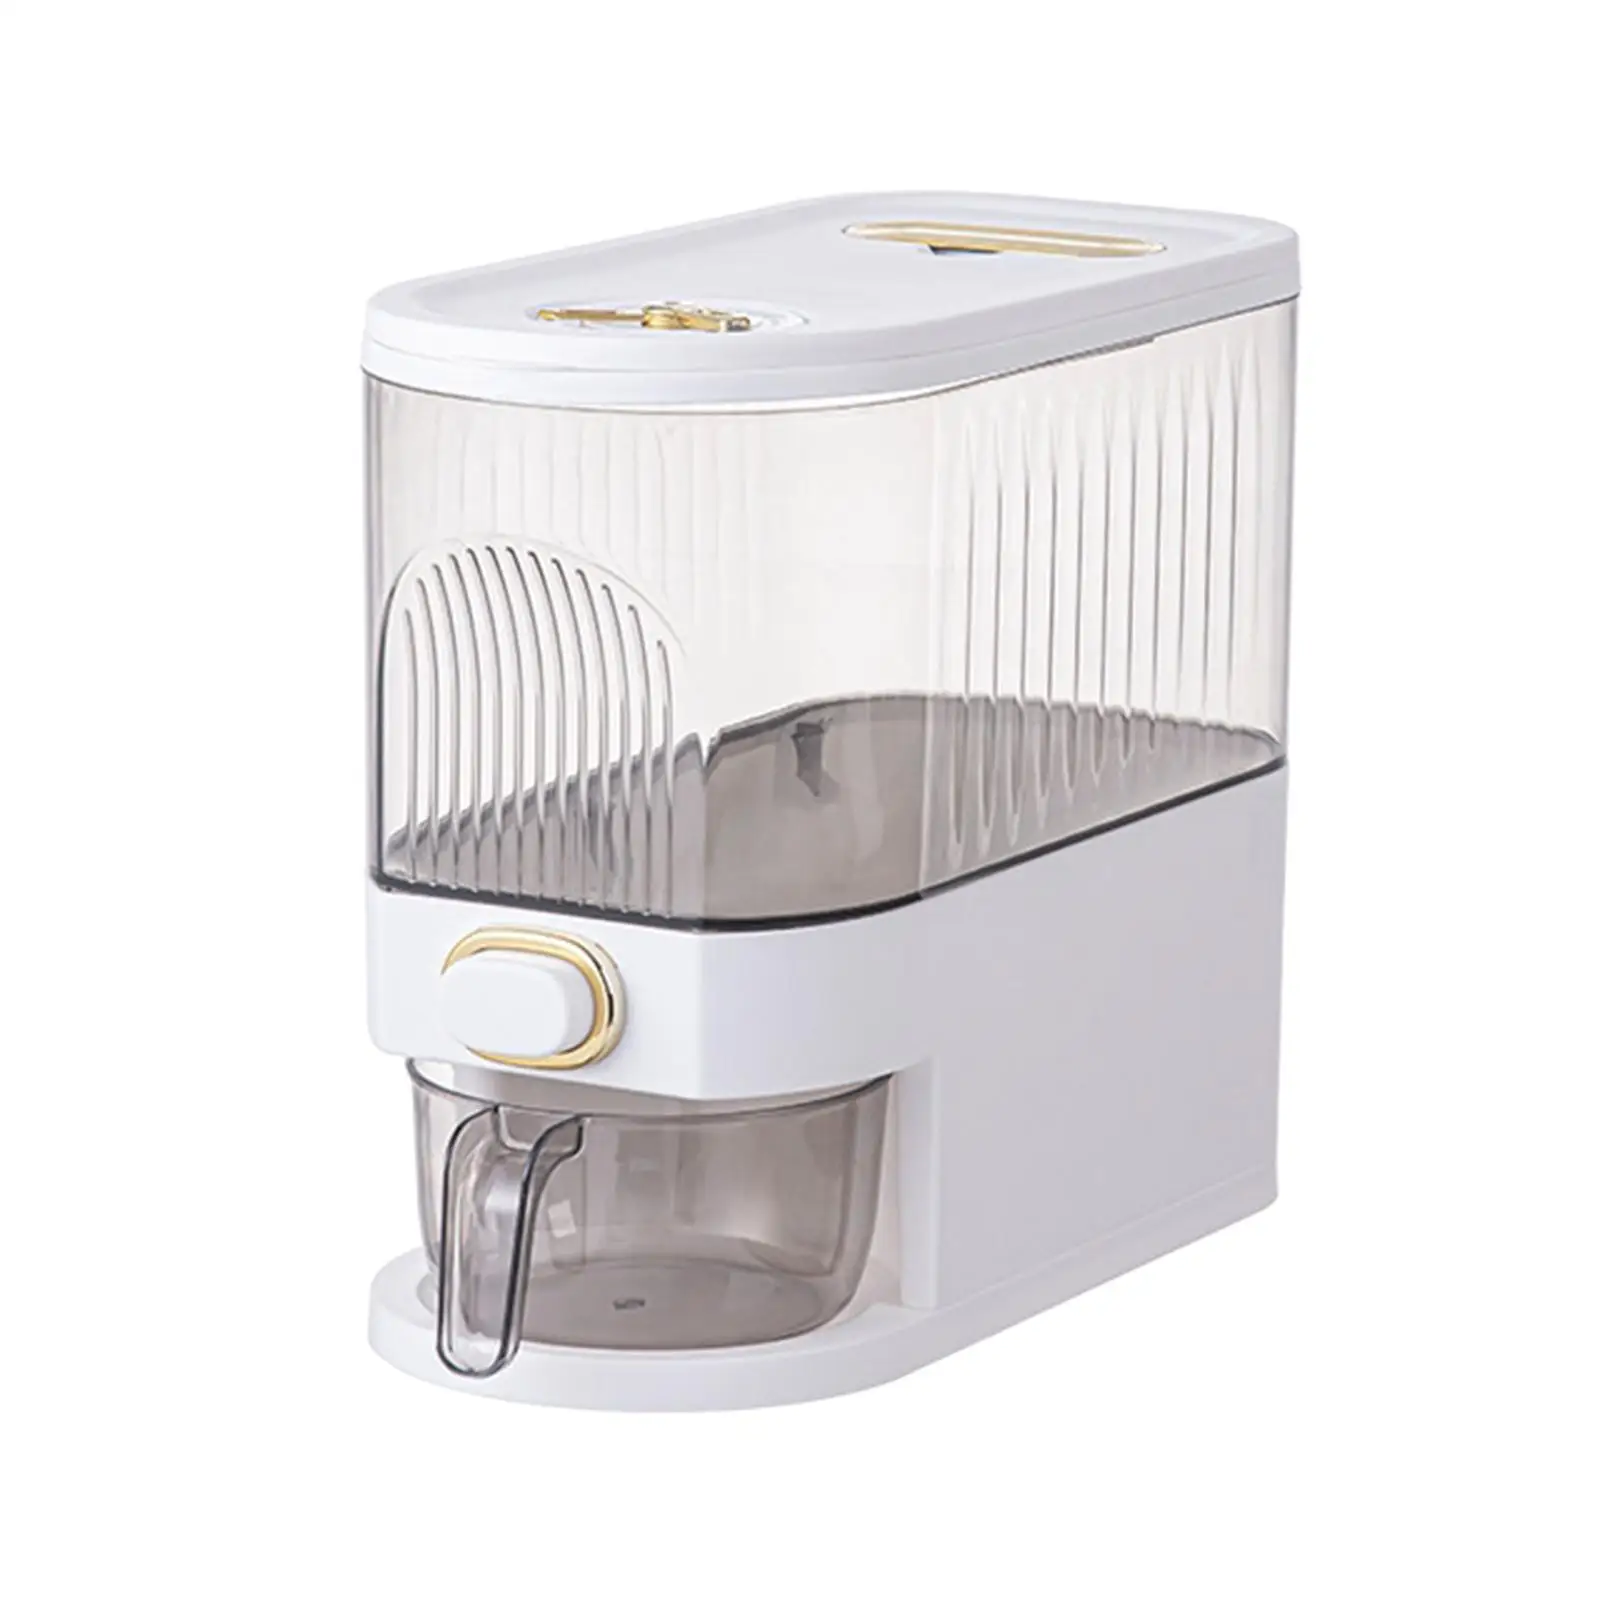 Rice Dispenser Container Storage Box Food Dispenser Countertop Rice Dispenser for Grain Flour Dry Food Soybean Household